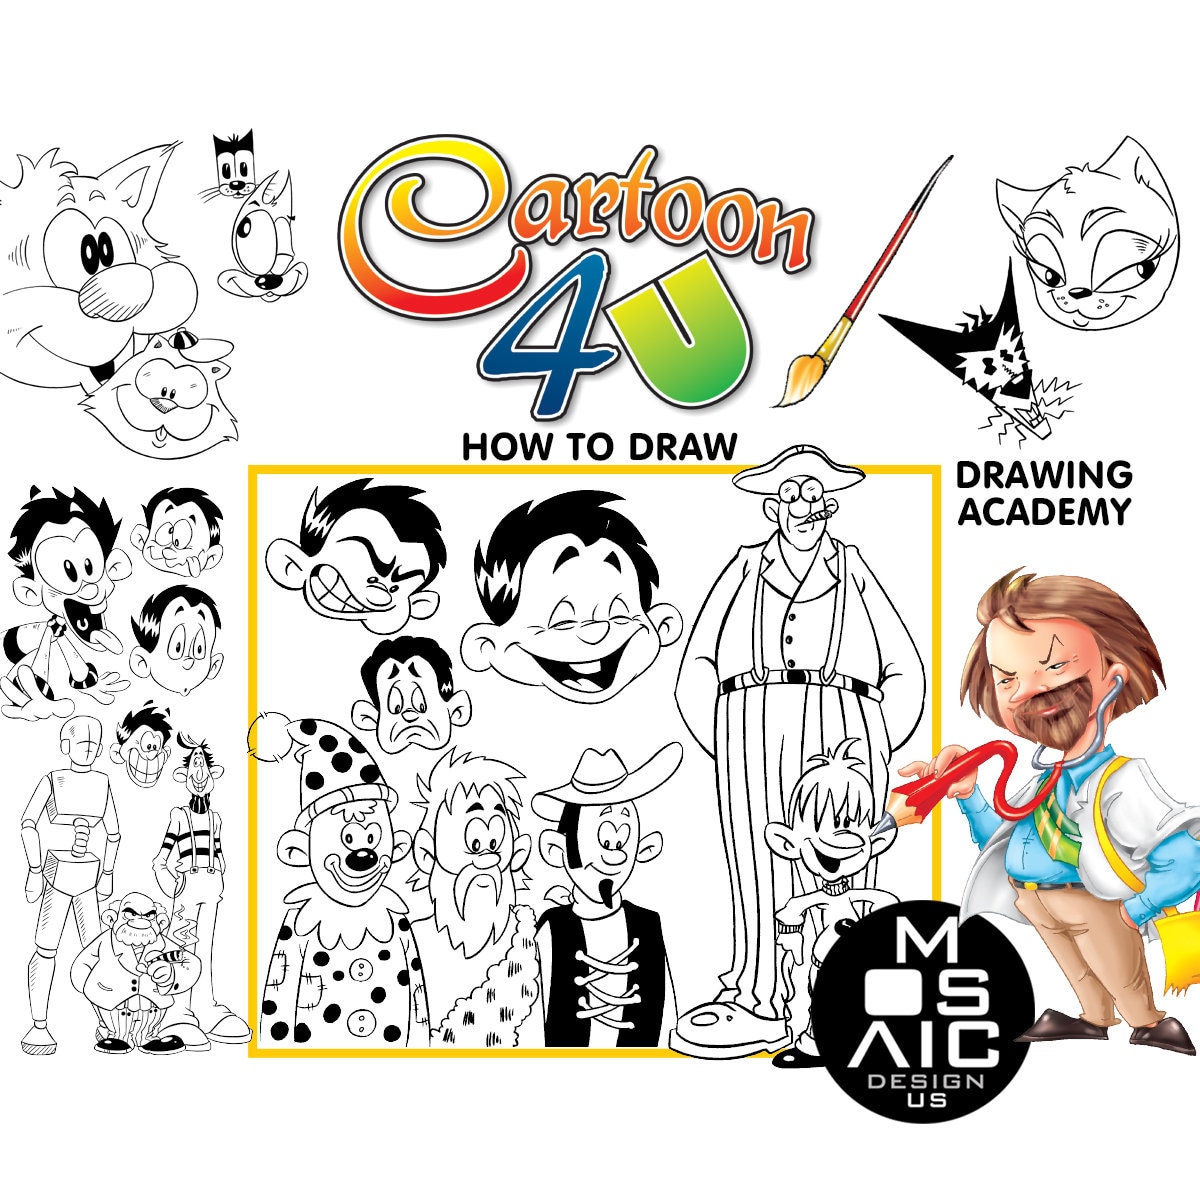 how to draw cartoon 4u step by step guide funny characters etsy